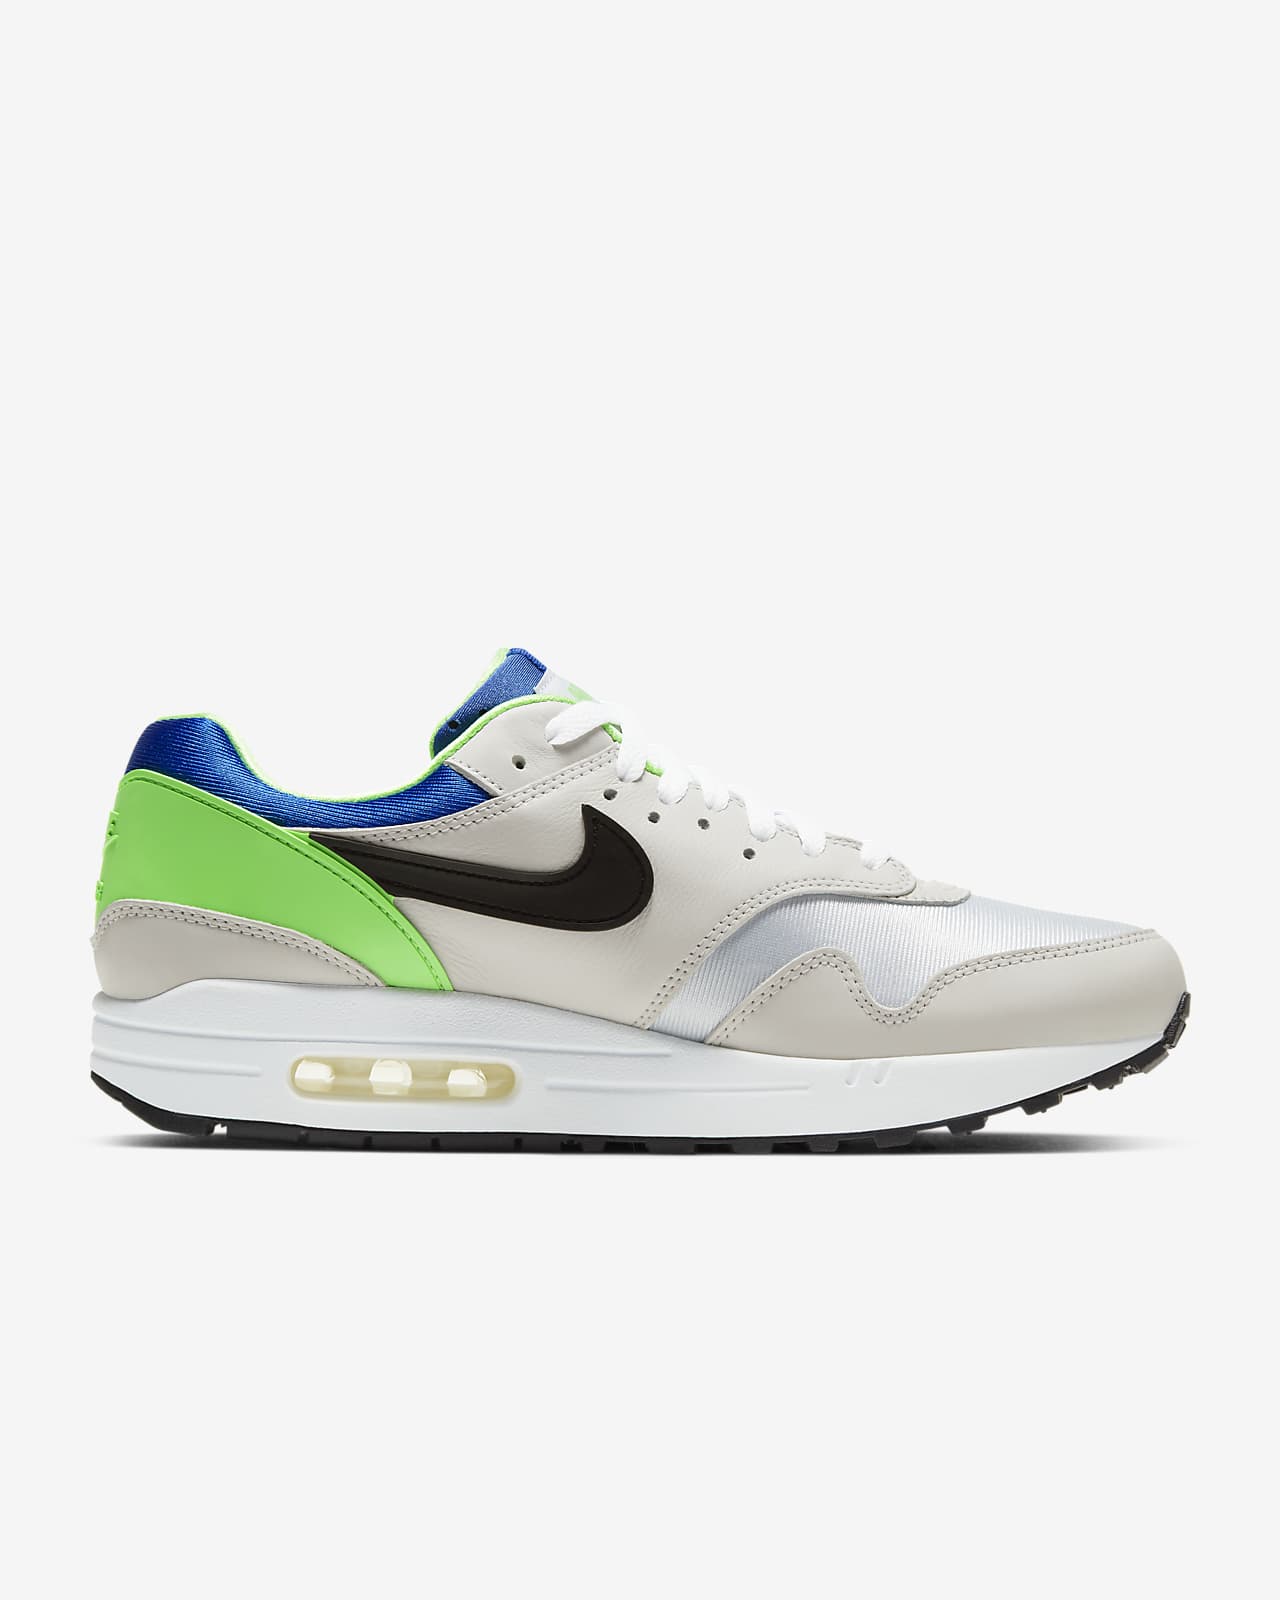 nike air max one limited edition